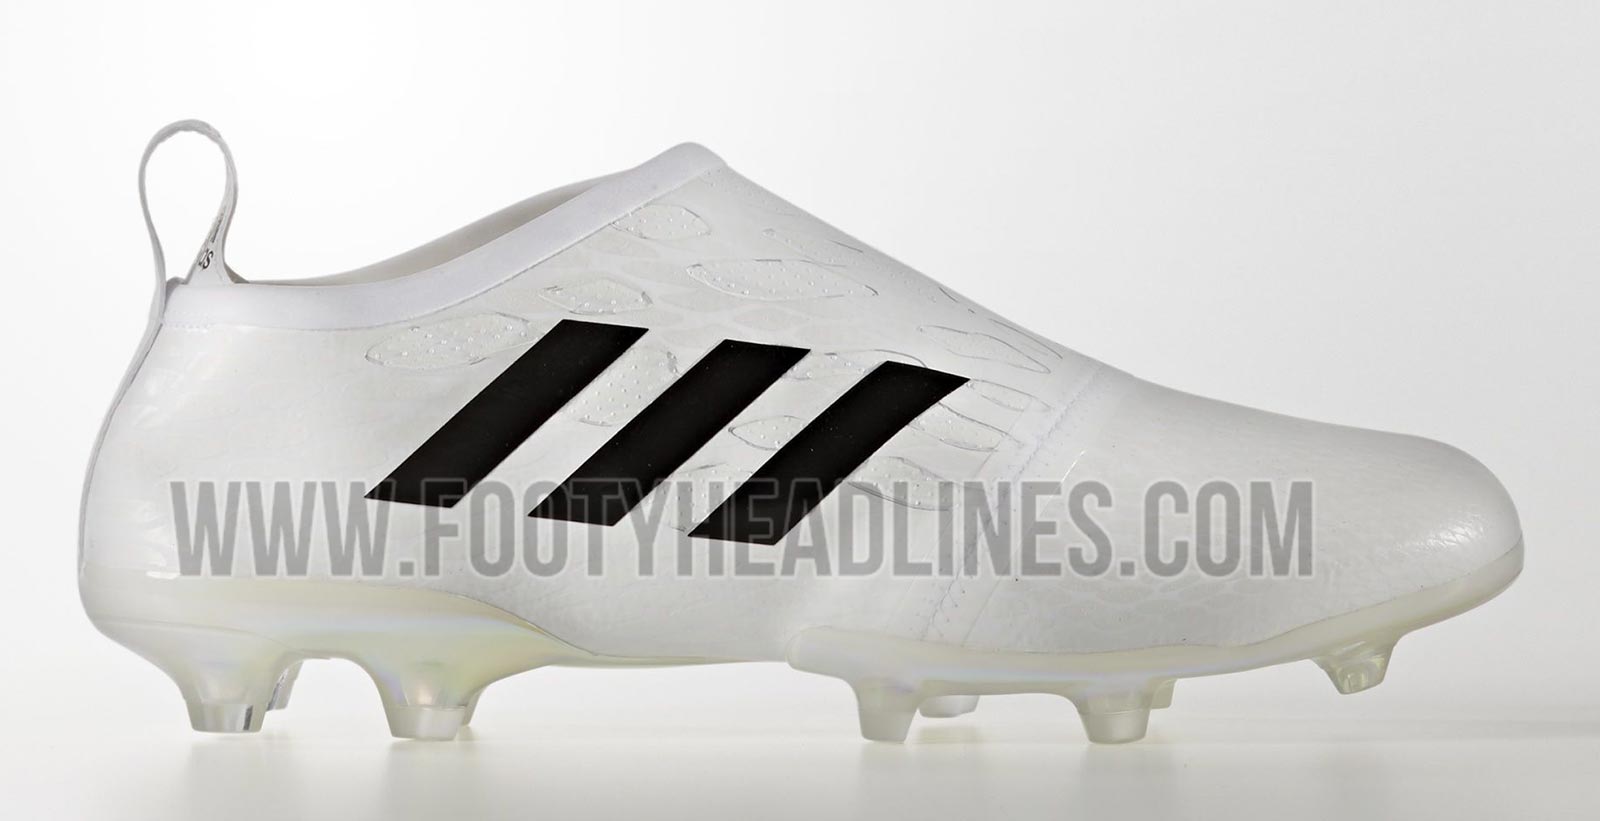 Adidas Glitch Released - Boot With Interchangeable Upper Sole Plate - Footy Headlines